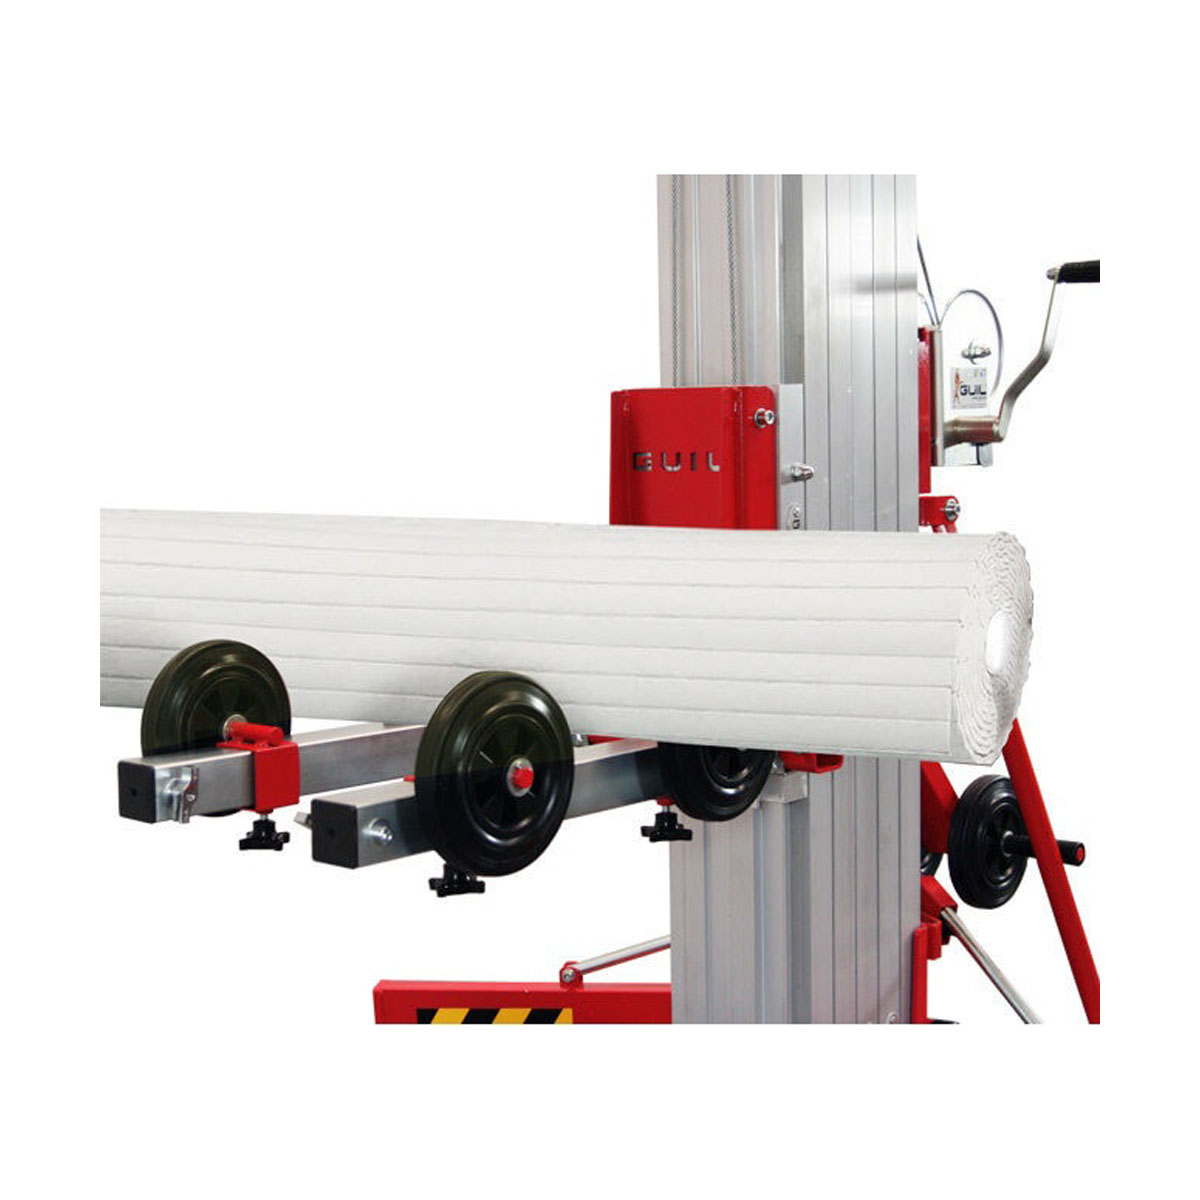 Buy Roller Door Adaptor for GUIL Lift Equipment in Utility Lifters | Materials Handling Lift Towers from GUIL available at Astrolift NZ